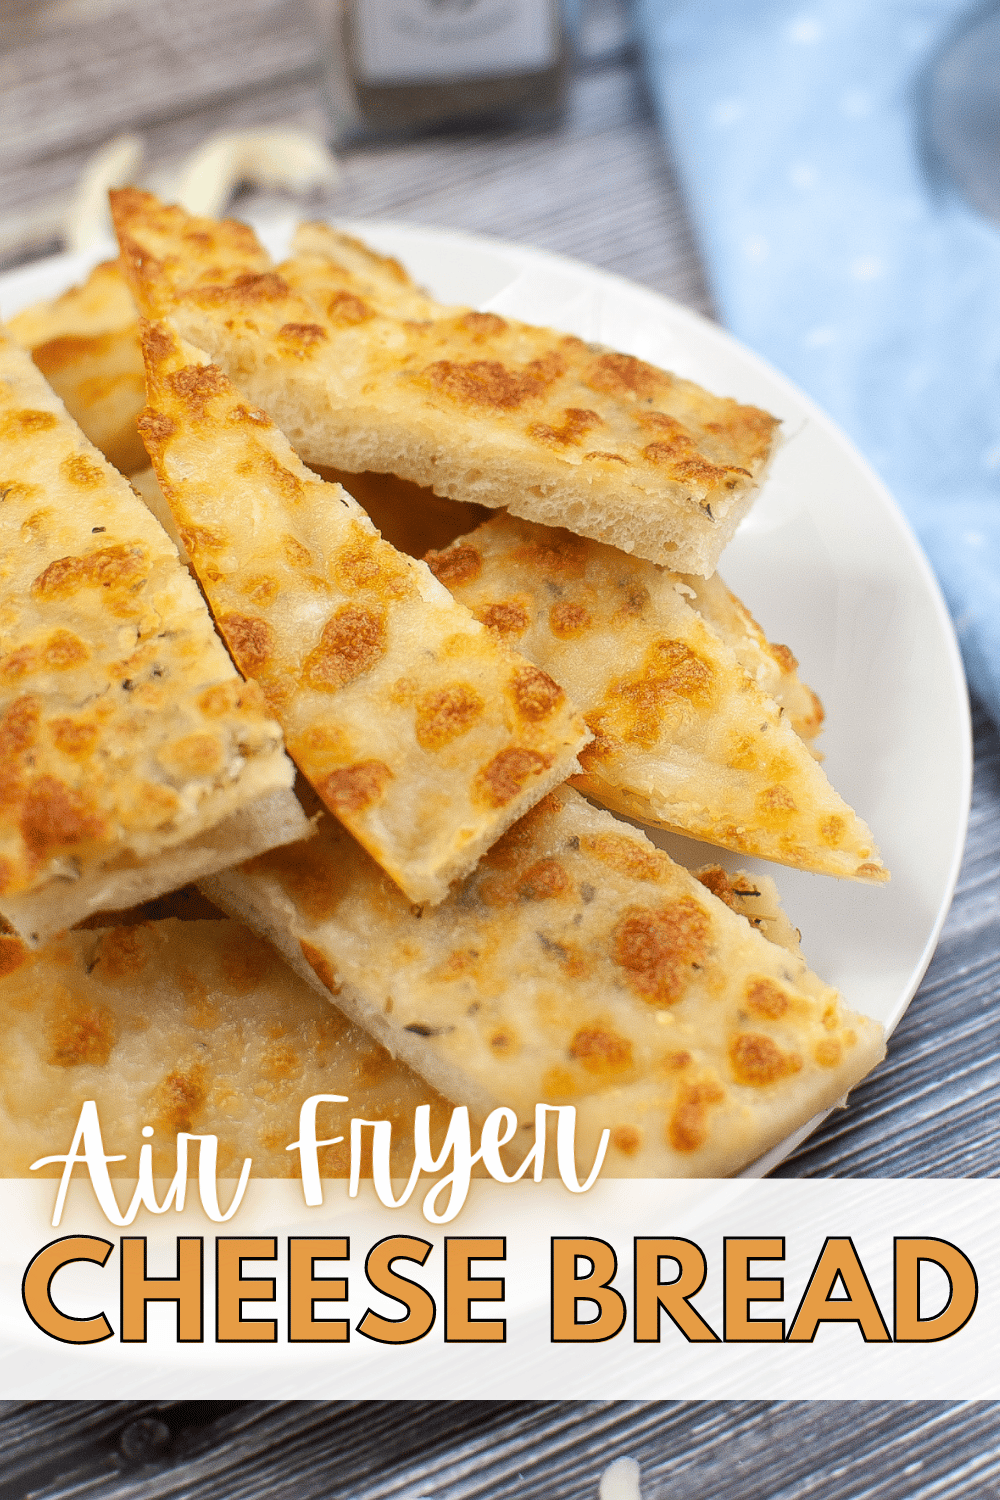 This Air Fryer Cheese Bread is delicious and easy to make. It’s perfect for an easy snack or appetizer. It’s cheesy, buttery, and delicious! #airfryercheesebread #airfryer #cheesebread #breadsticks #cheesygarlicbread via @wondermomwannab